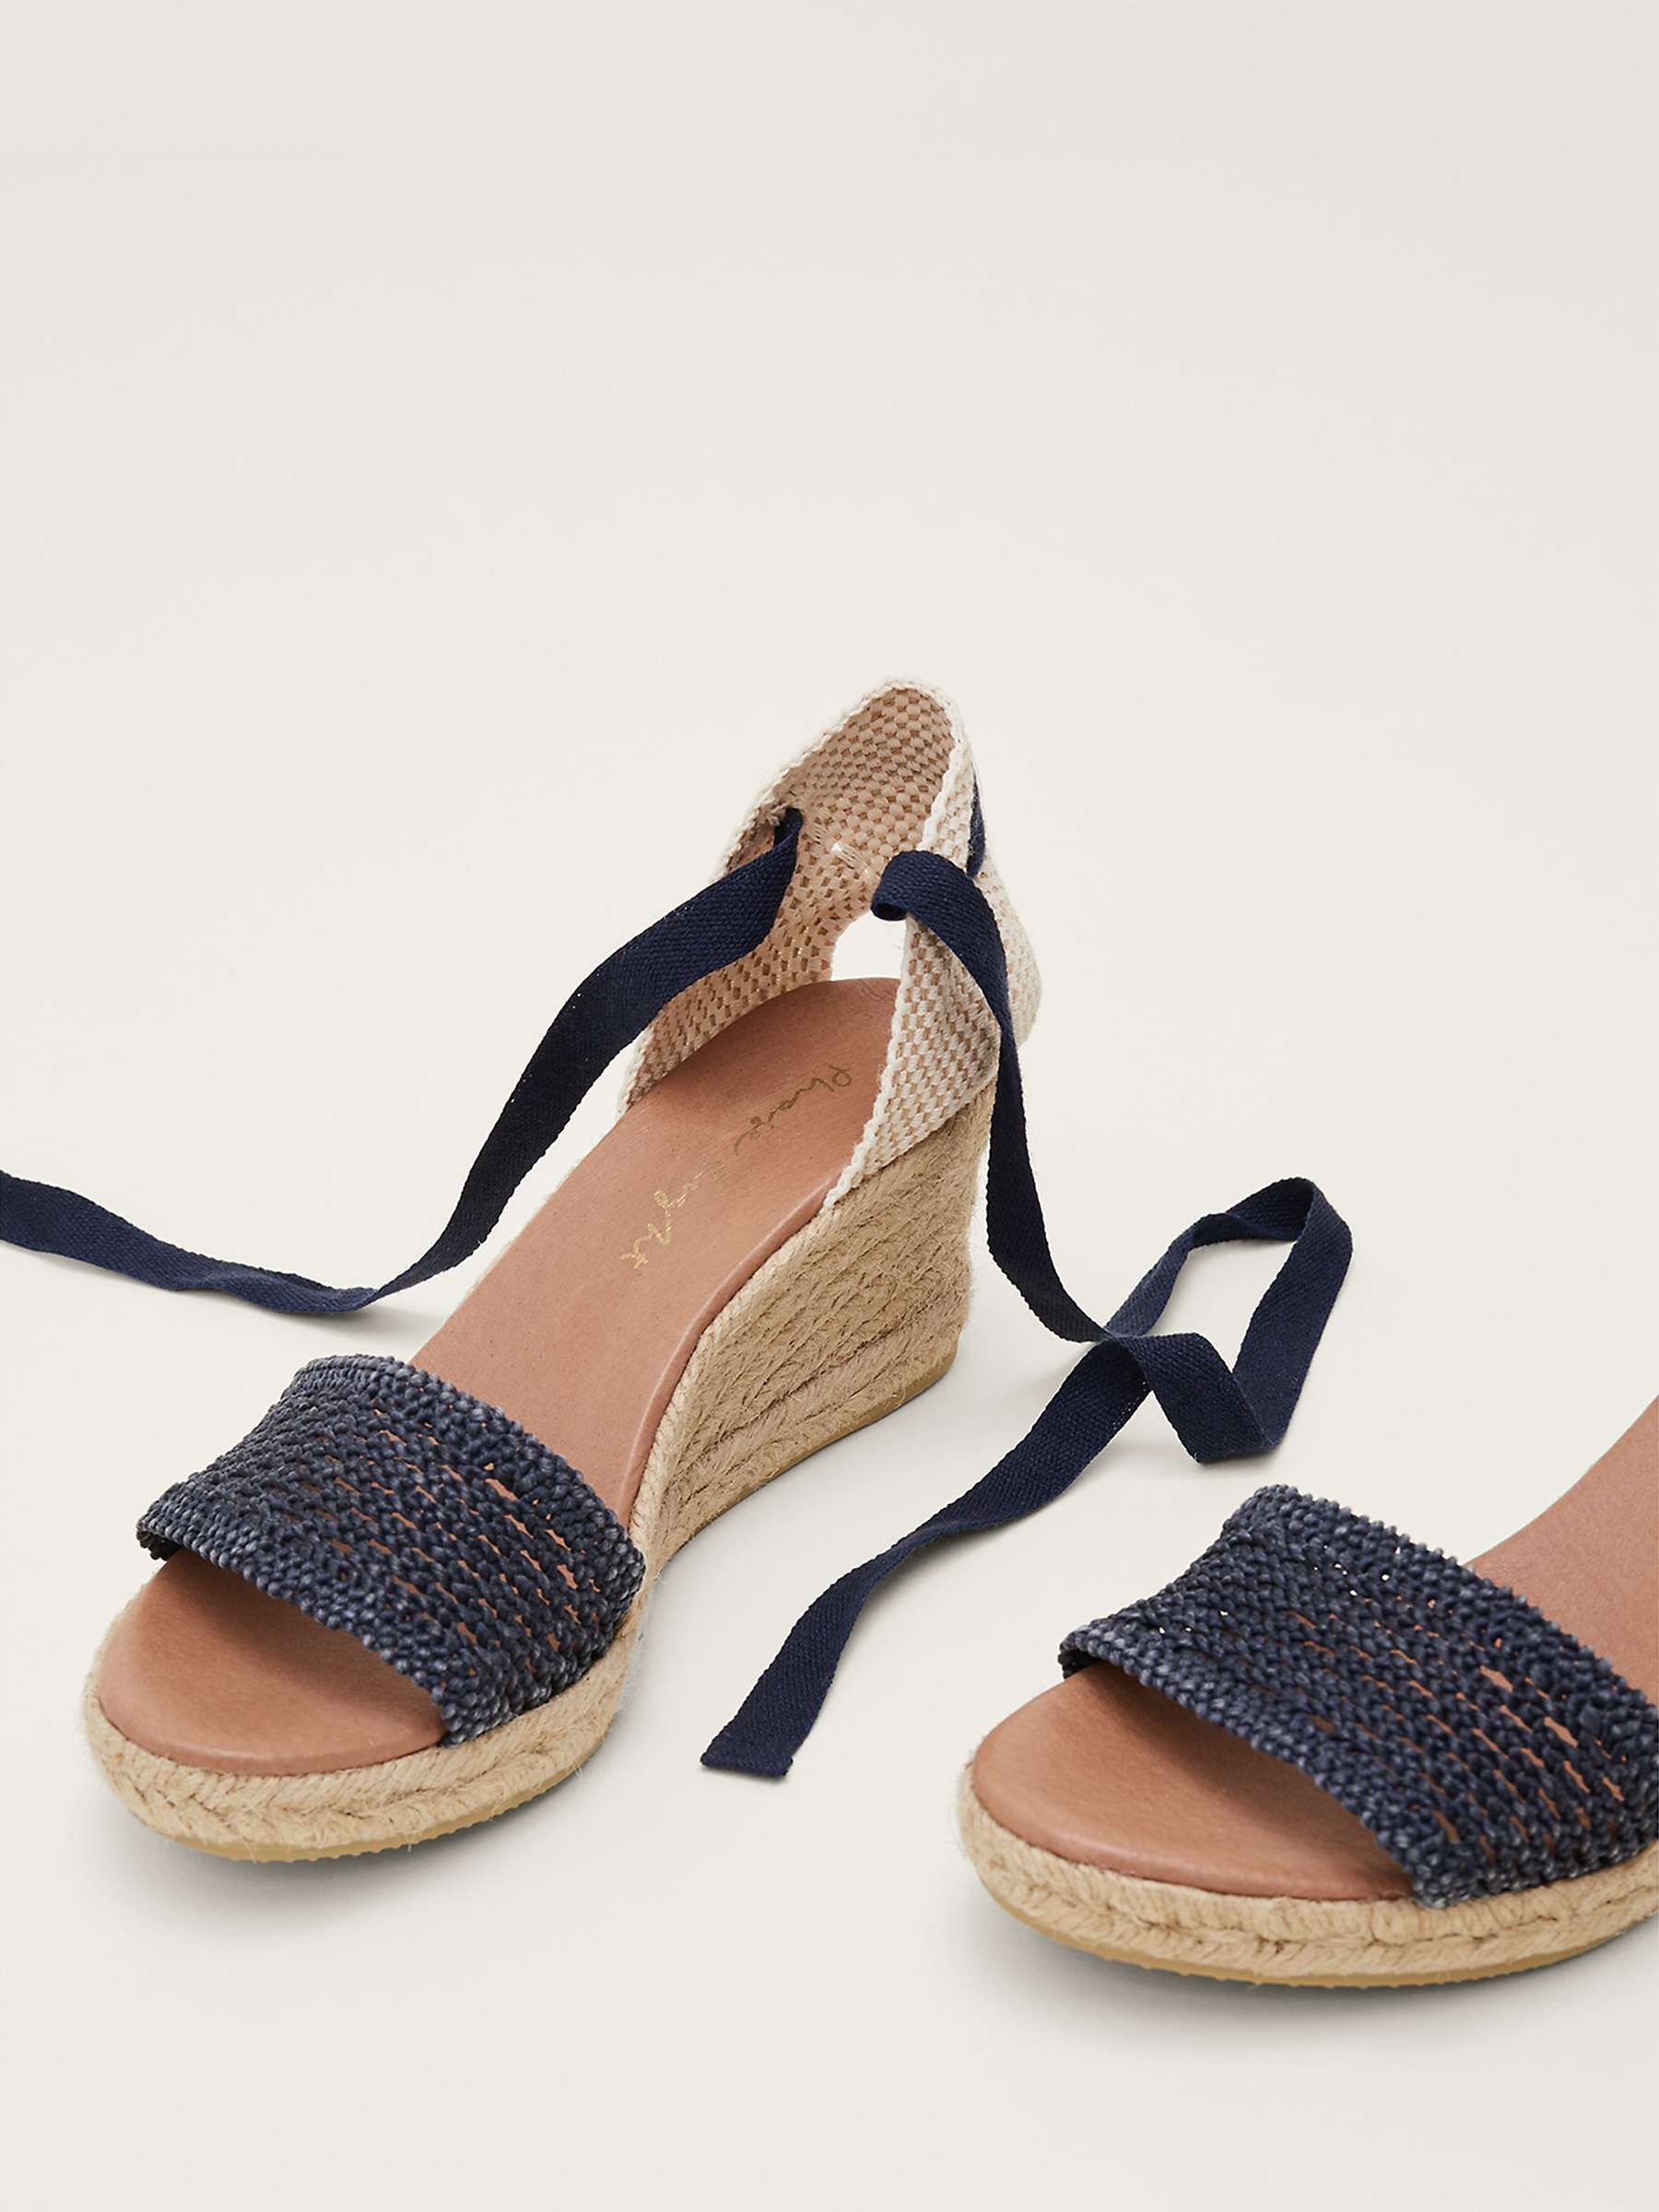 Buy Phase Eight Tie Strap Open Toe Espadrilles, Navy Online at johnlewis.com